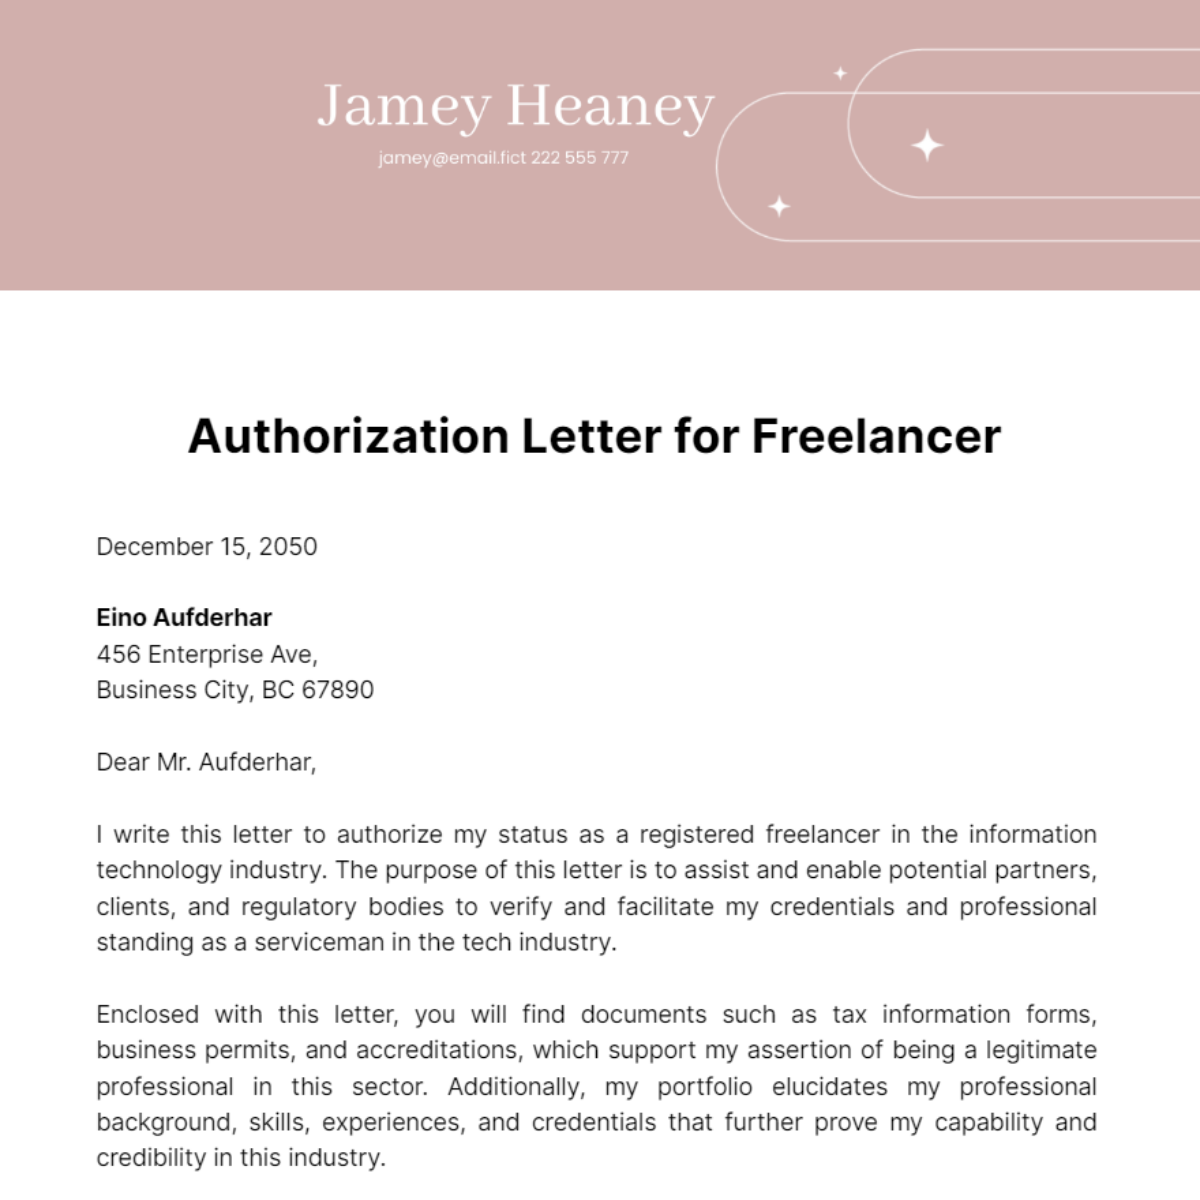 Authorization Letter for Freelancer Template